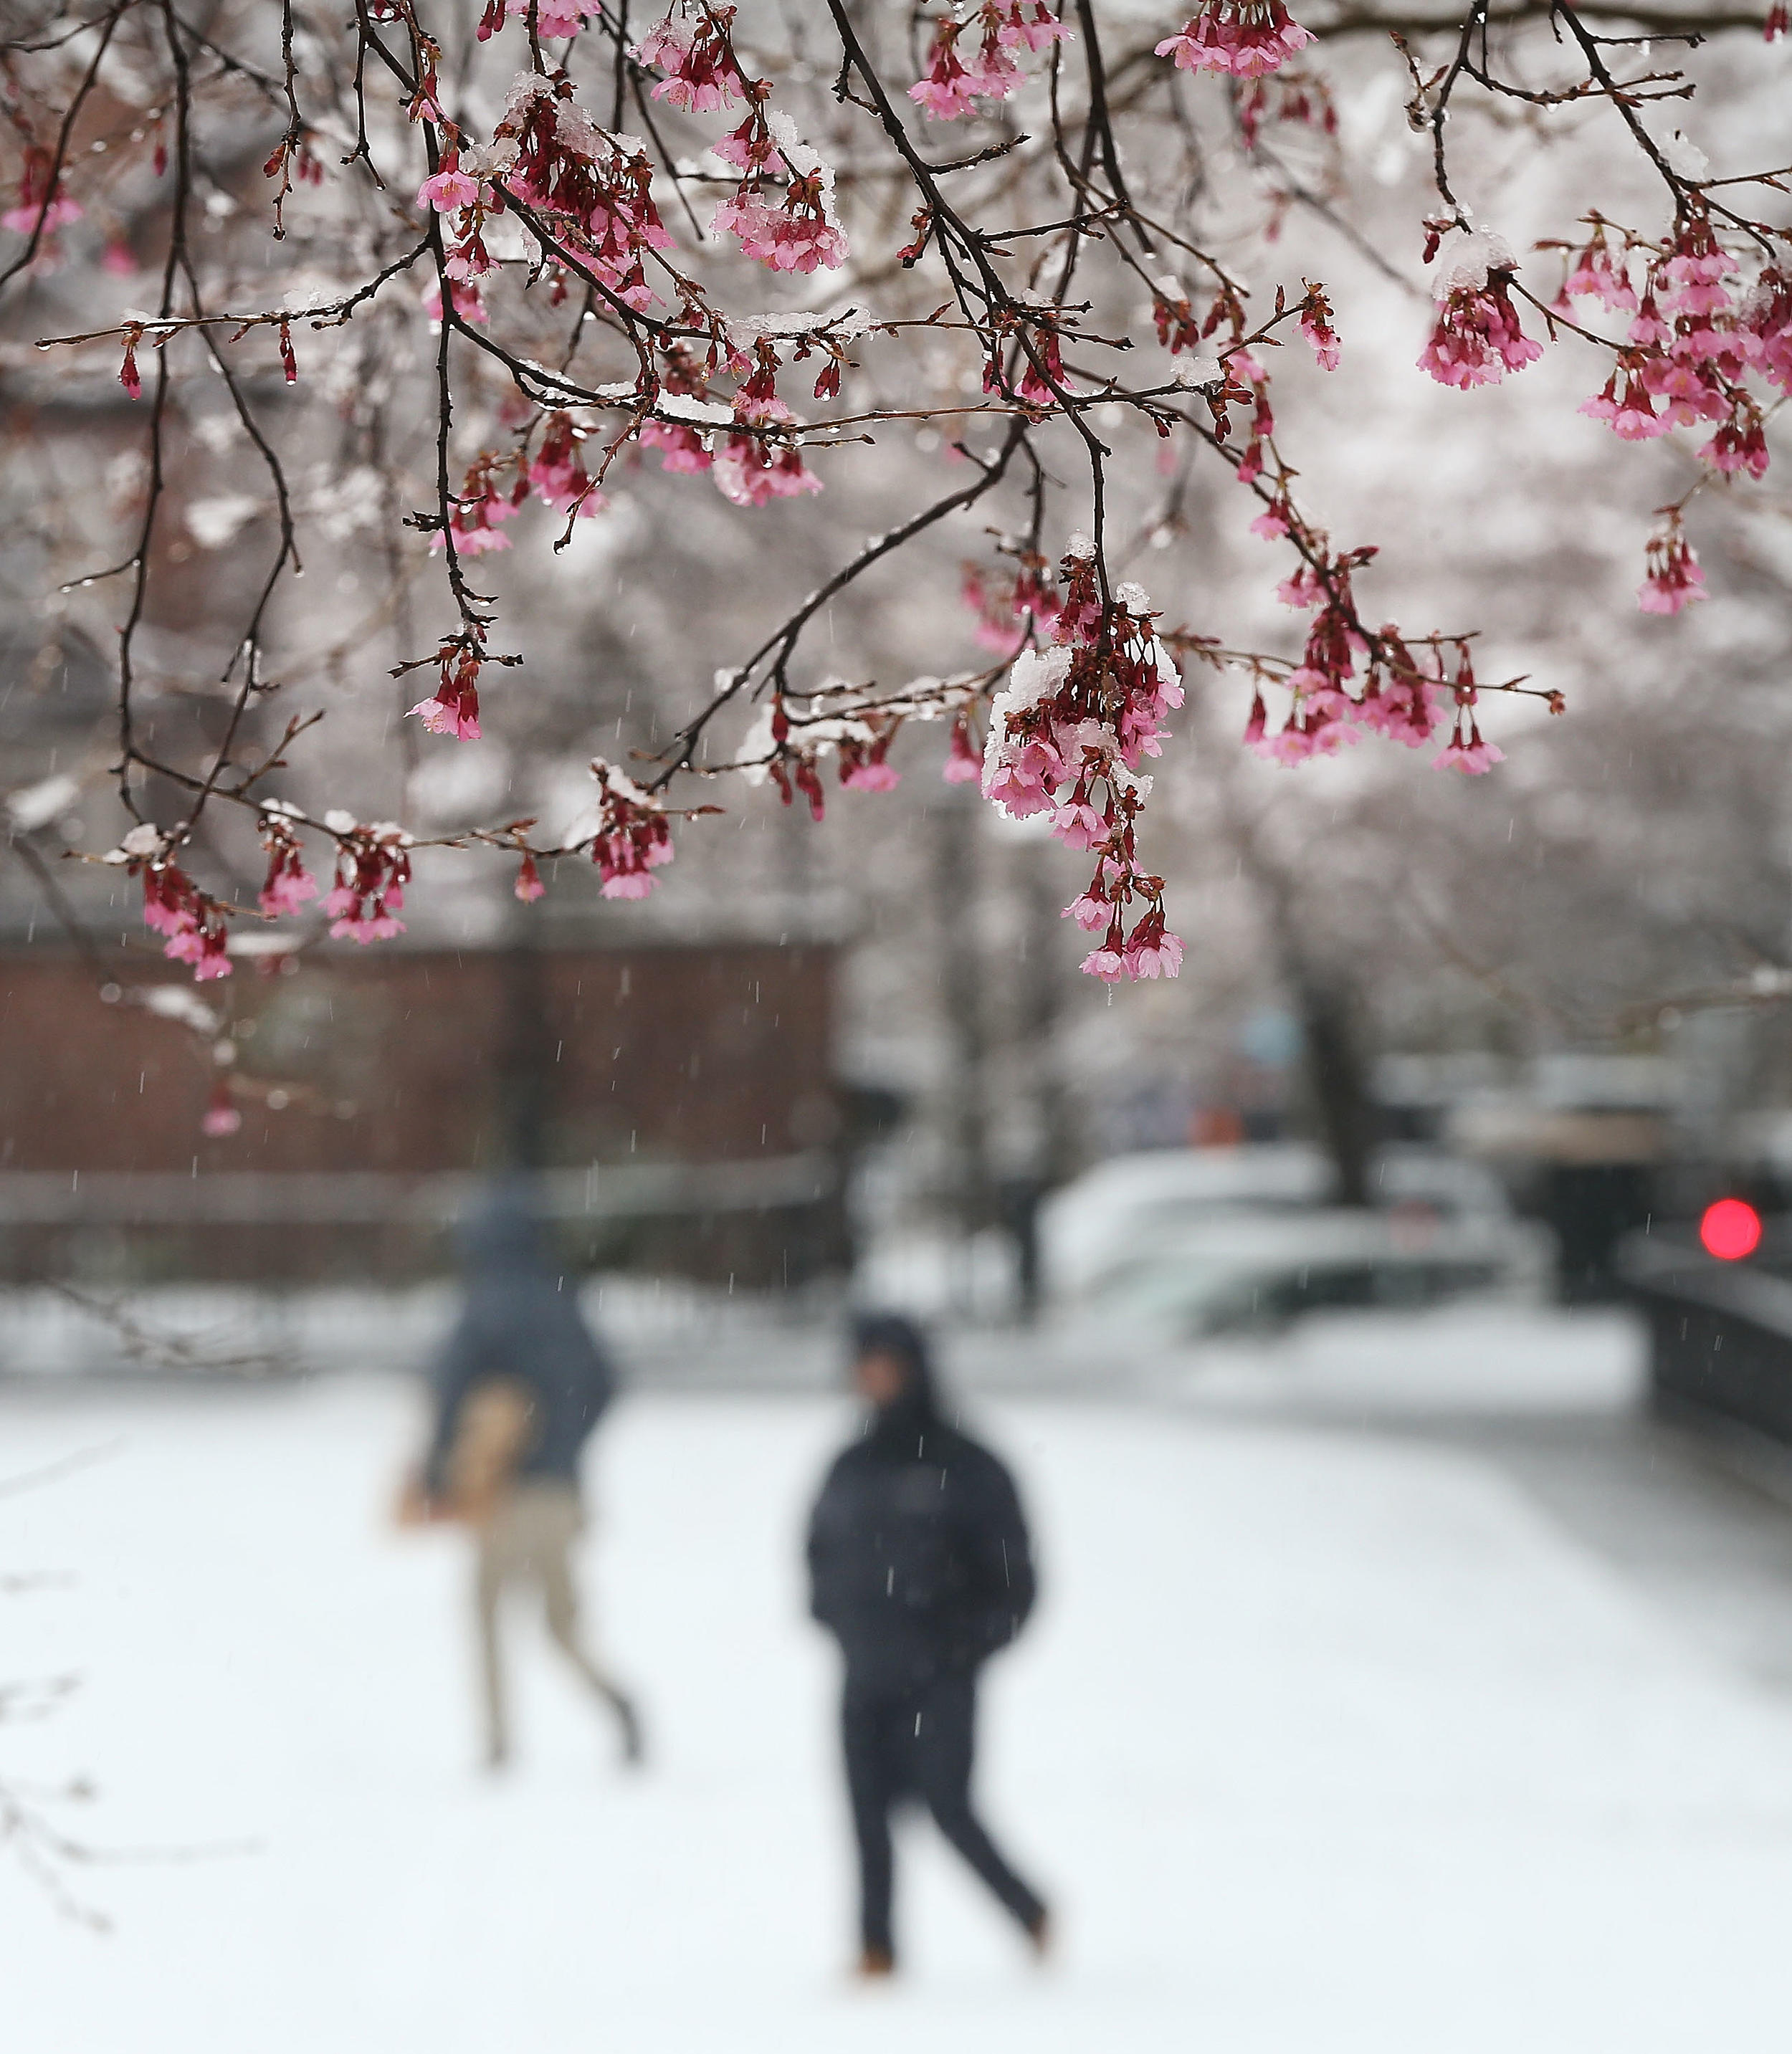 March Could End Up Being Minnesota's Snowiest Month This Winter